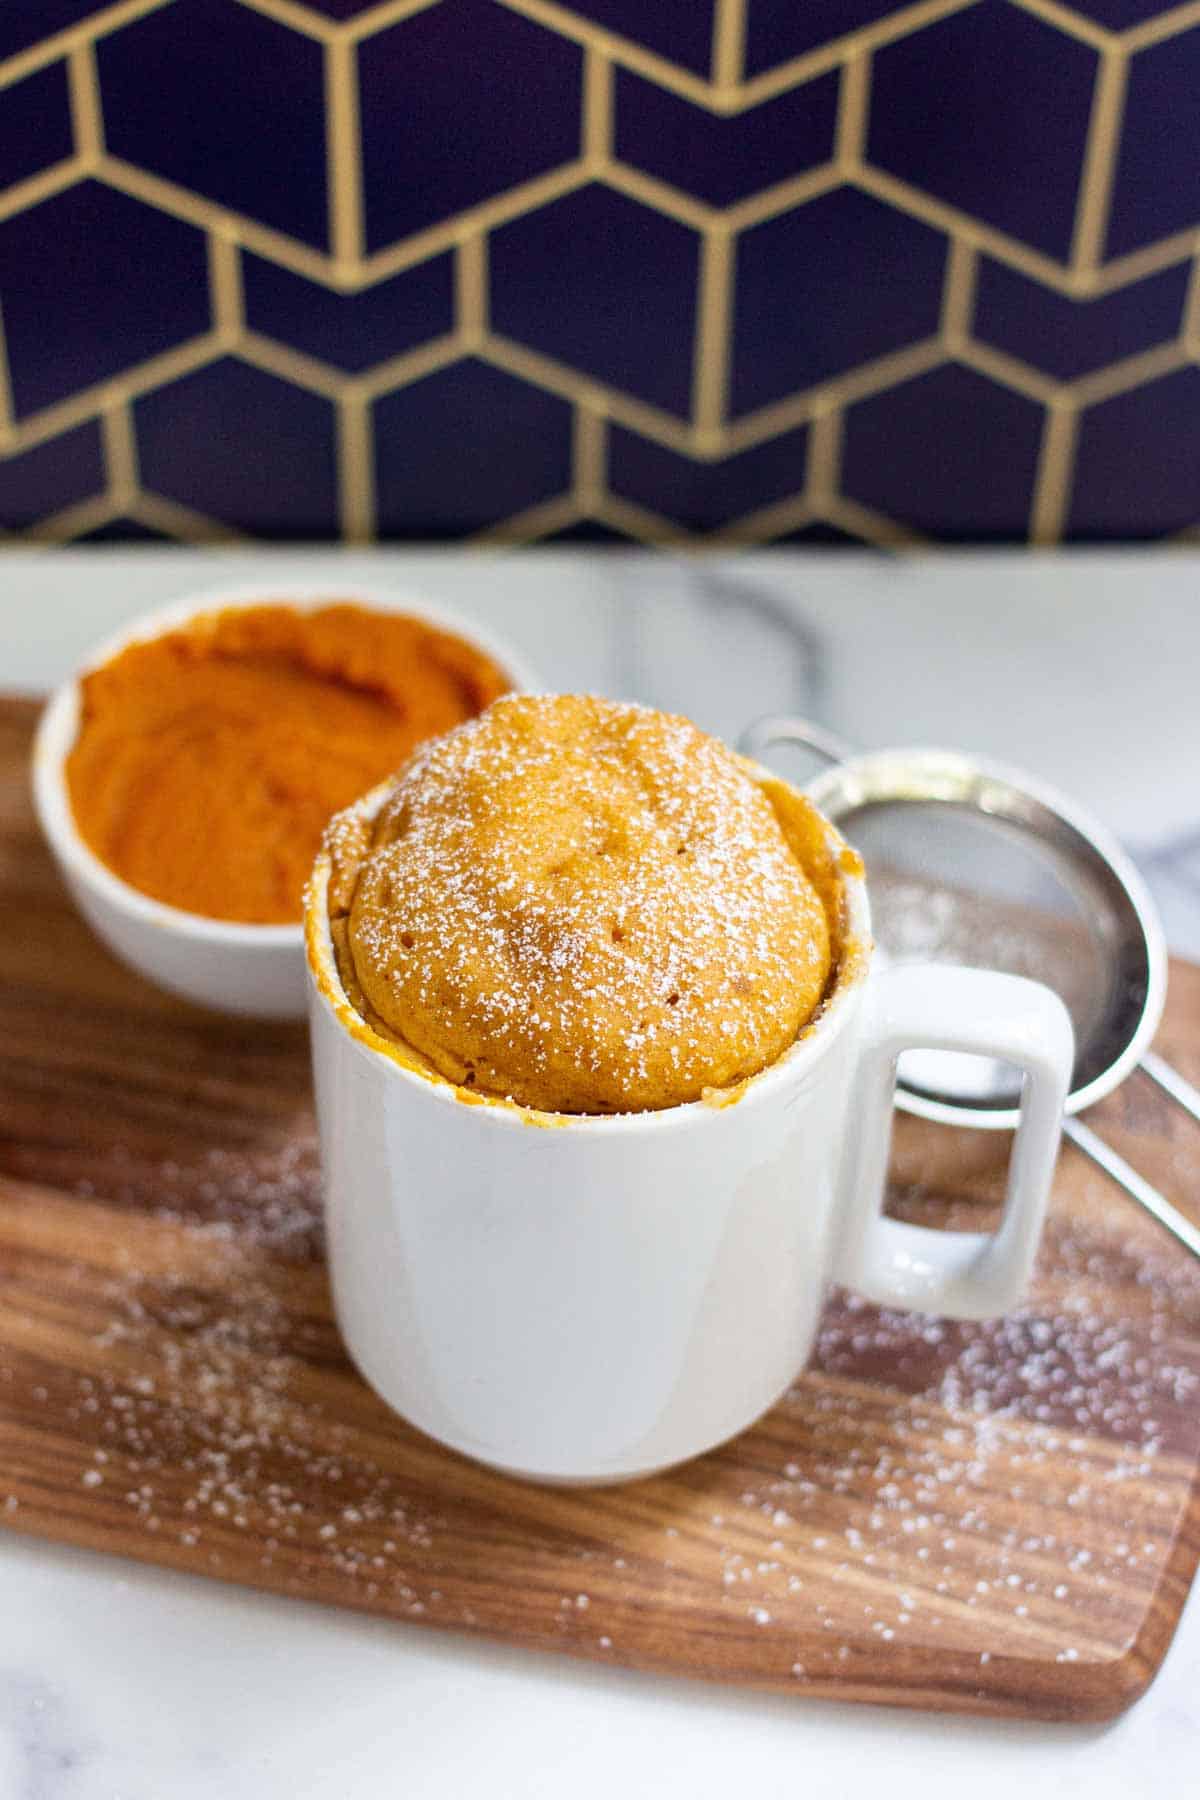 Pumpkin Spice Mug Cake dusted with light layer of powdered sugar.